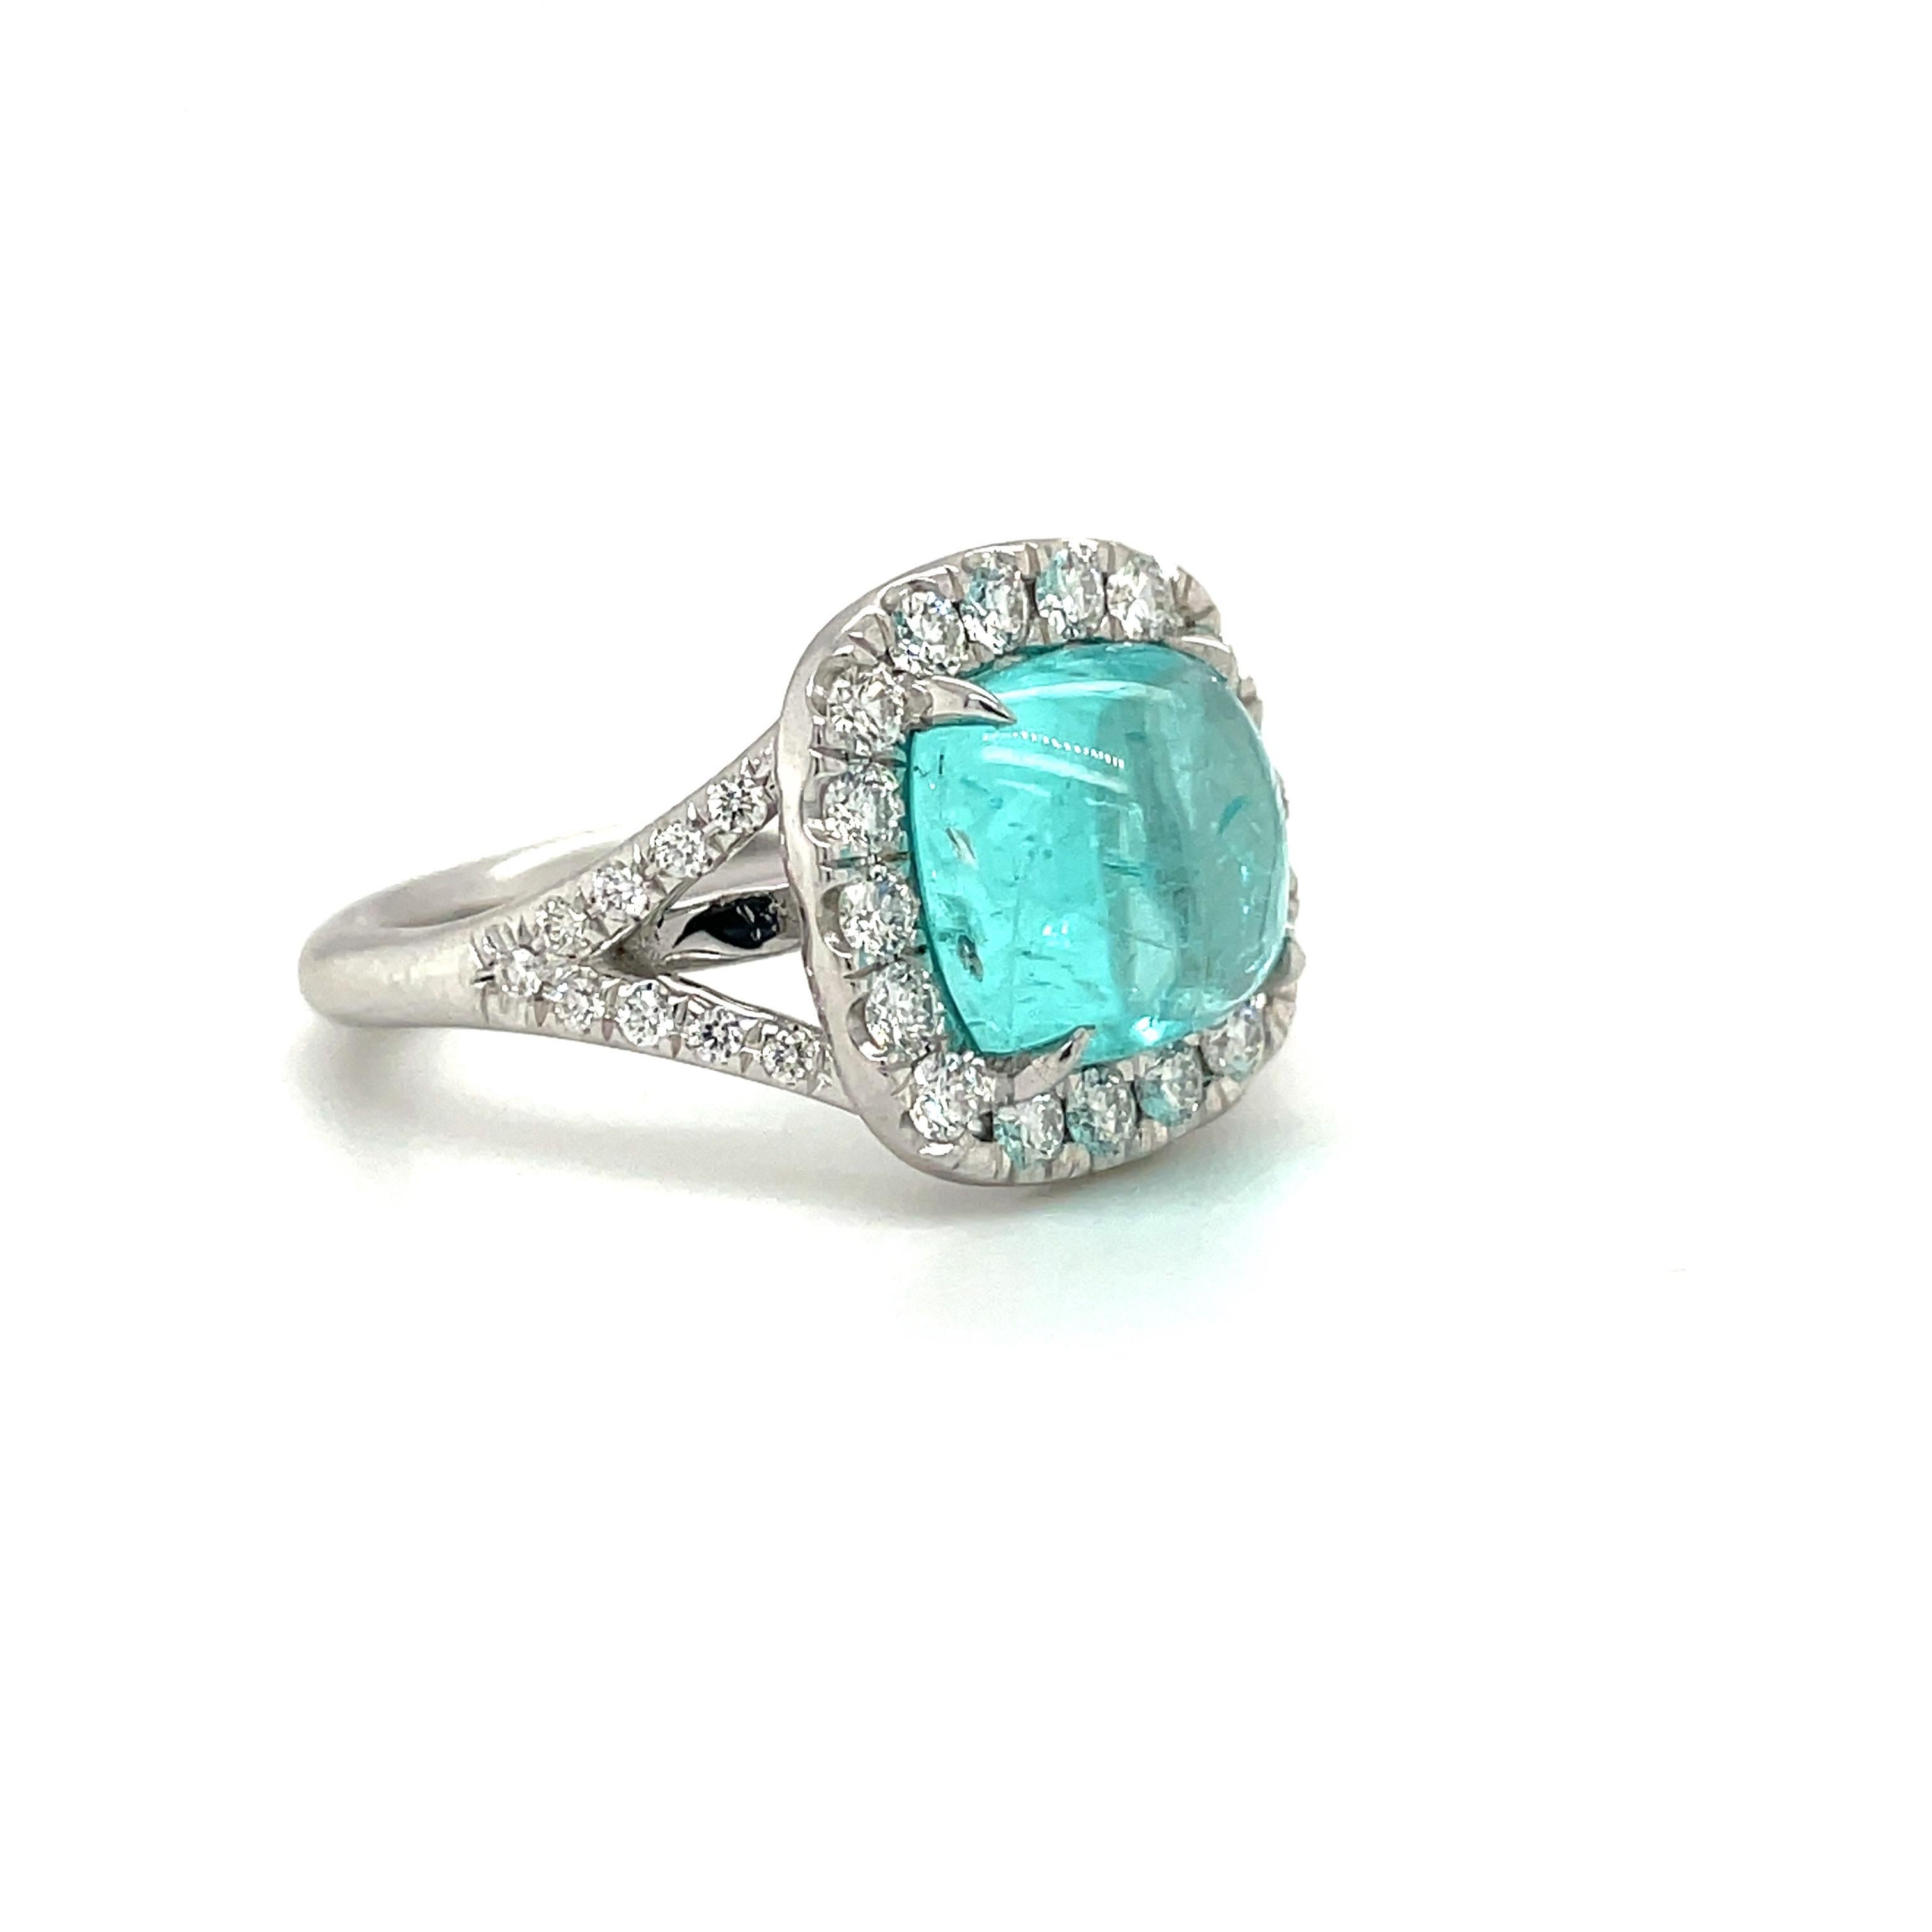 This 18 karat white gold ring centers a magnificent 4.07 carat cabochon paraiba tourmaline. The cushion shaped stone is surrounded by round brilliant diamonds. The shank of the ring is a split style set with round diamonds half way down the band.